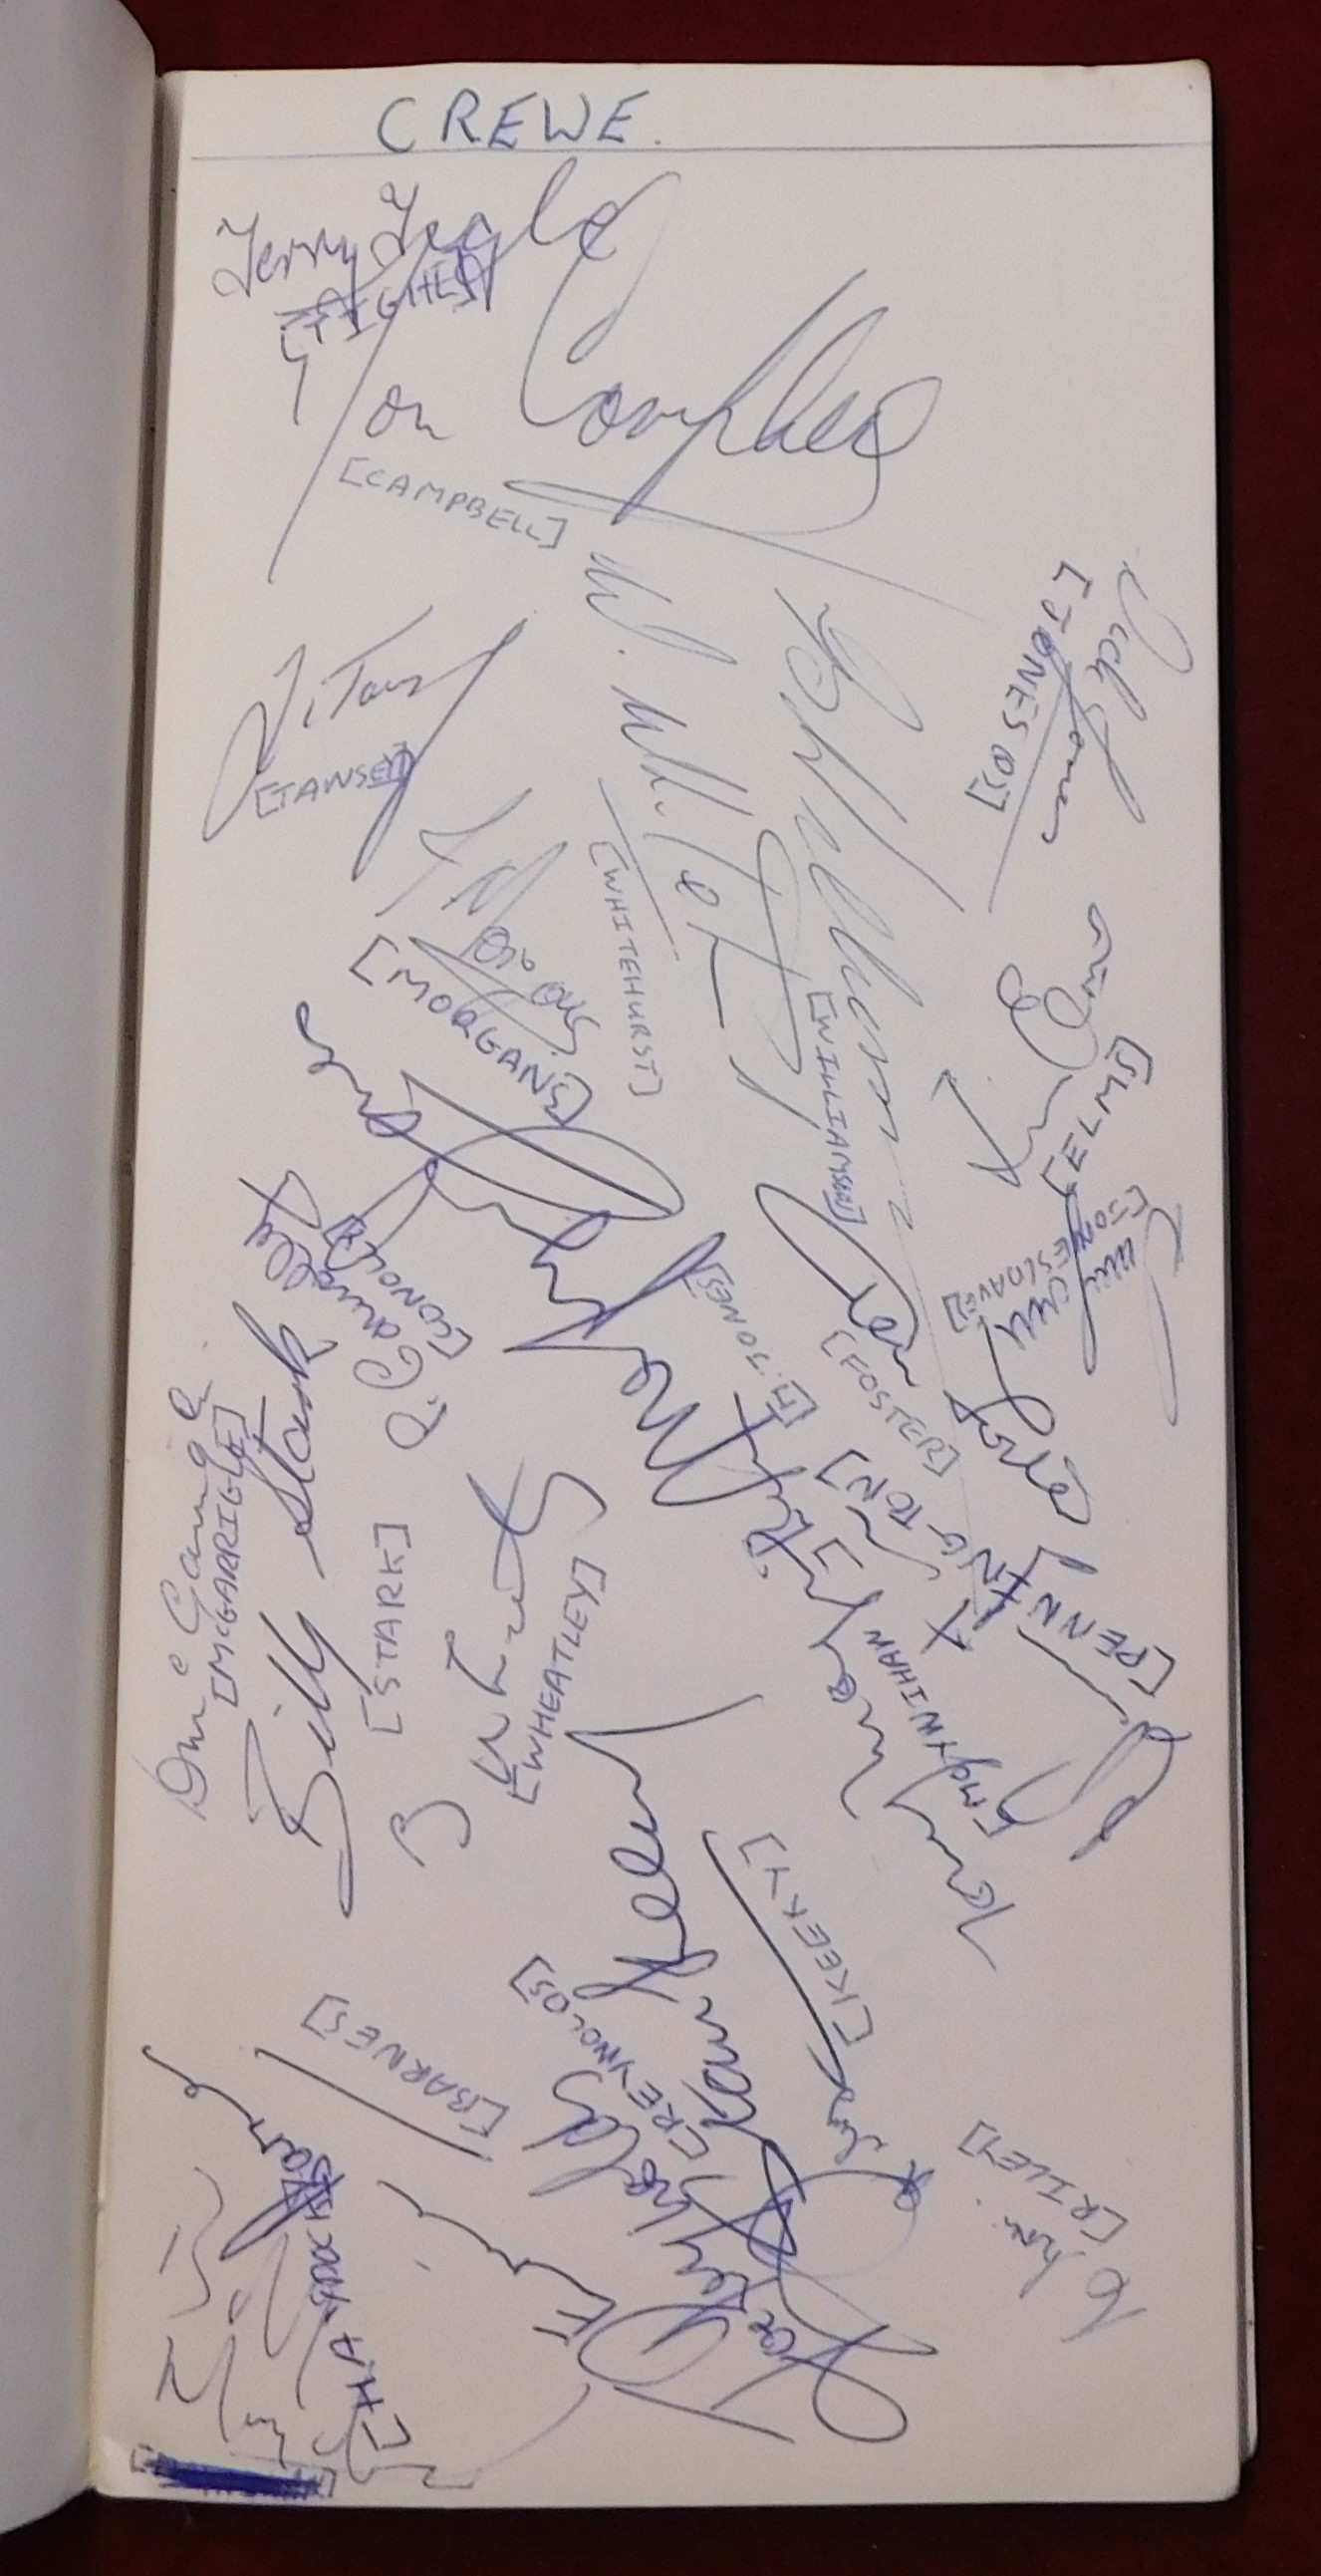 An autograph book with 120+ autographs from the 1959/60 and 1960/61 seasons featuring many clubs - Image 2 of 5